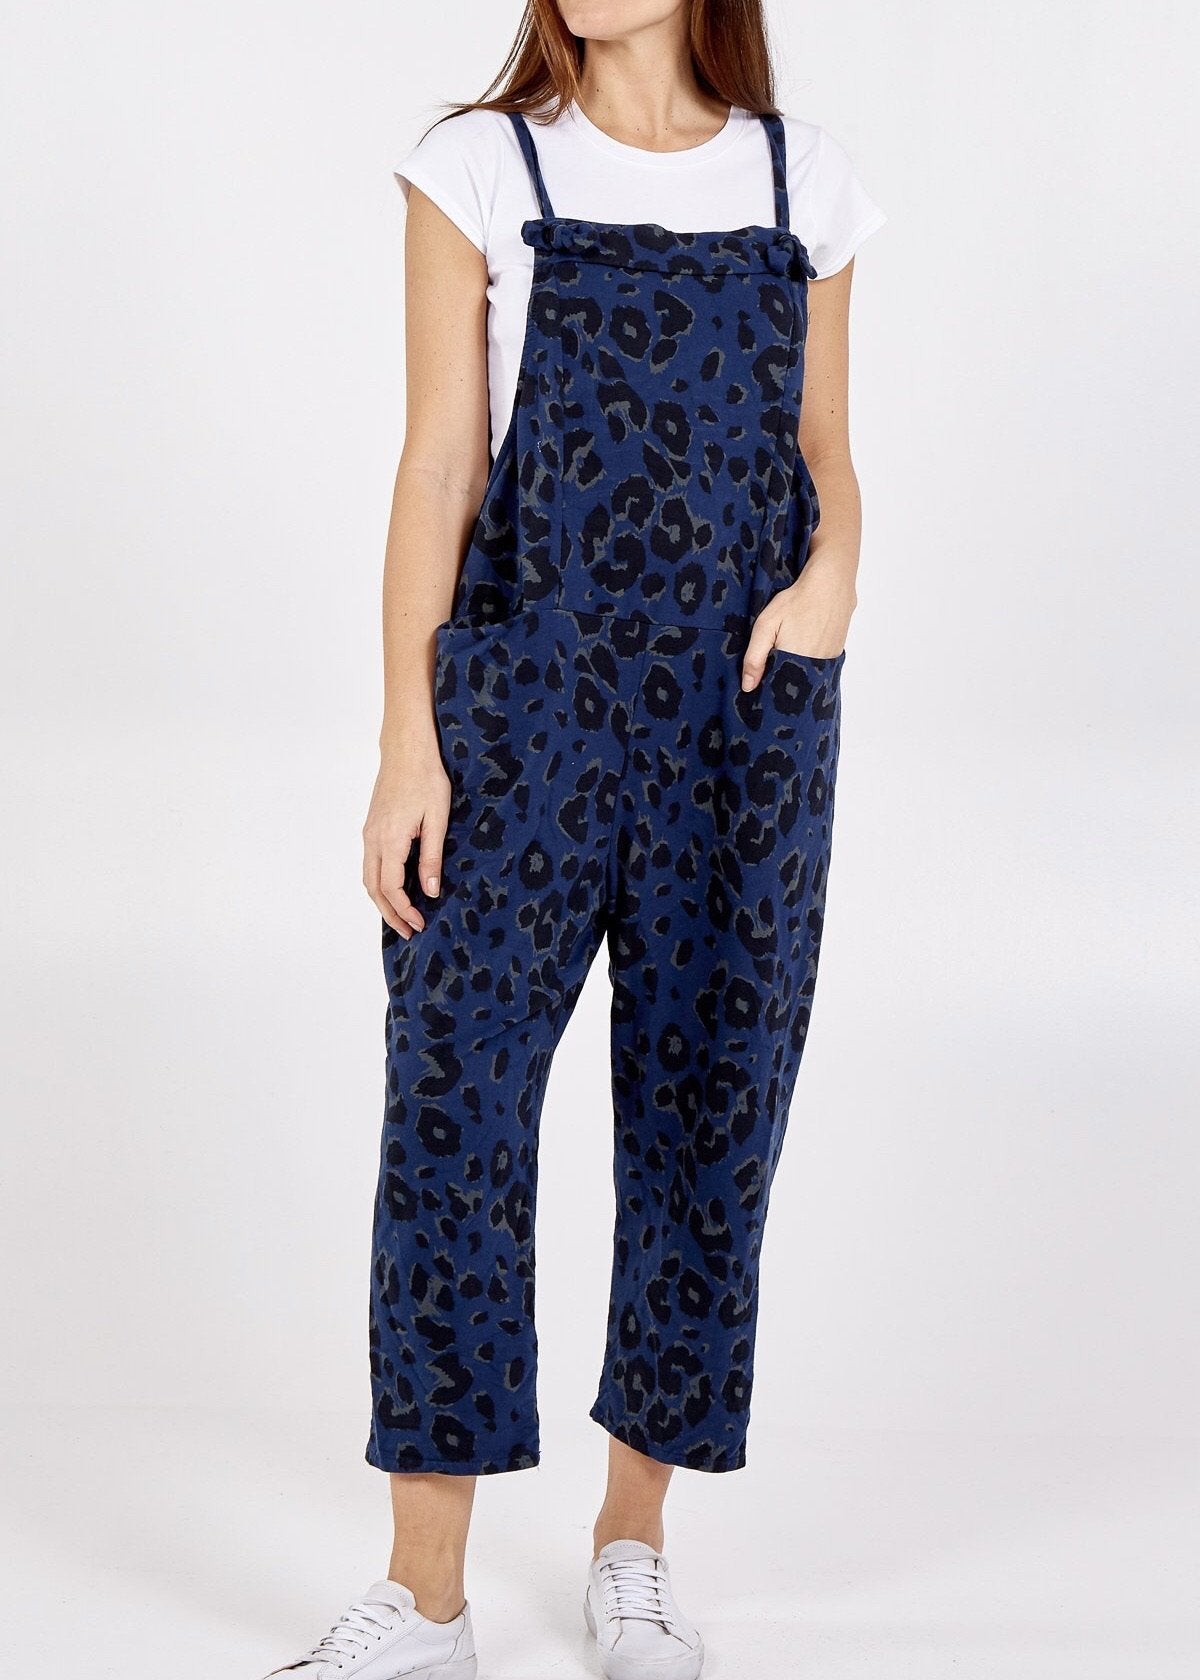 Porthleven Dungarees with pockets in navy with leopard print pattern and tie up straps